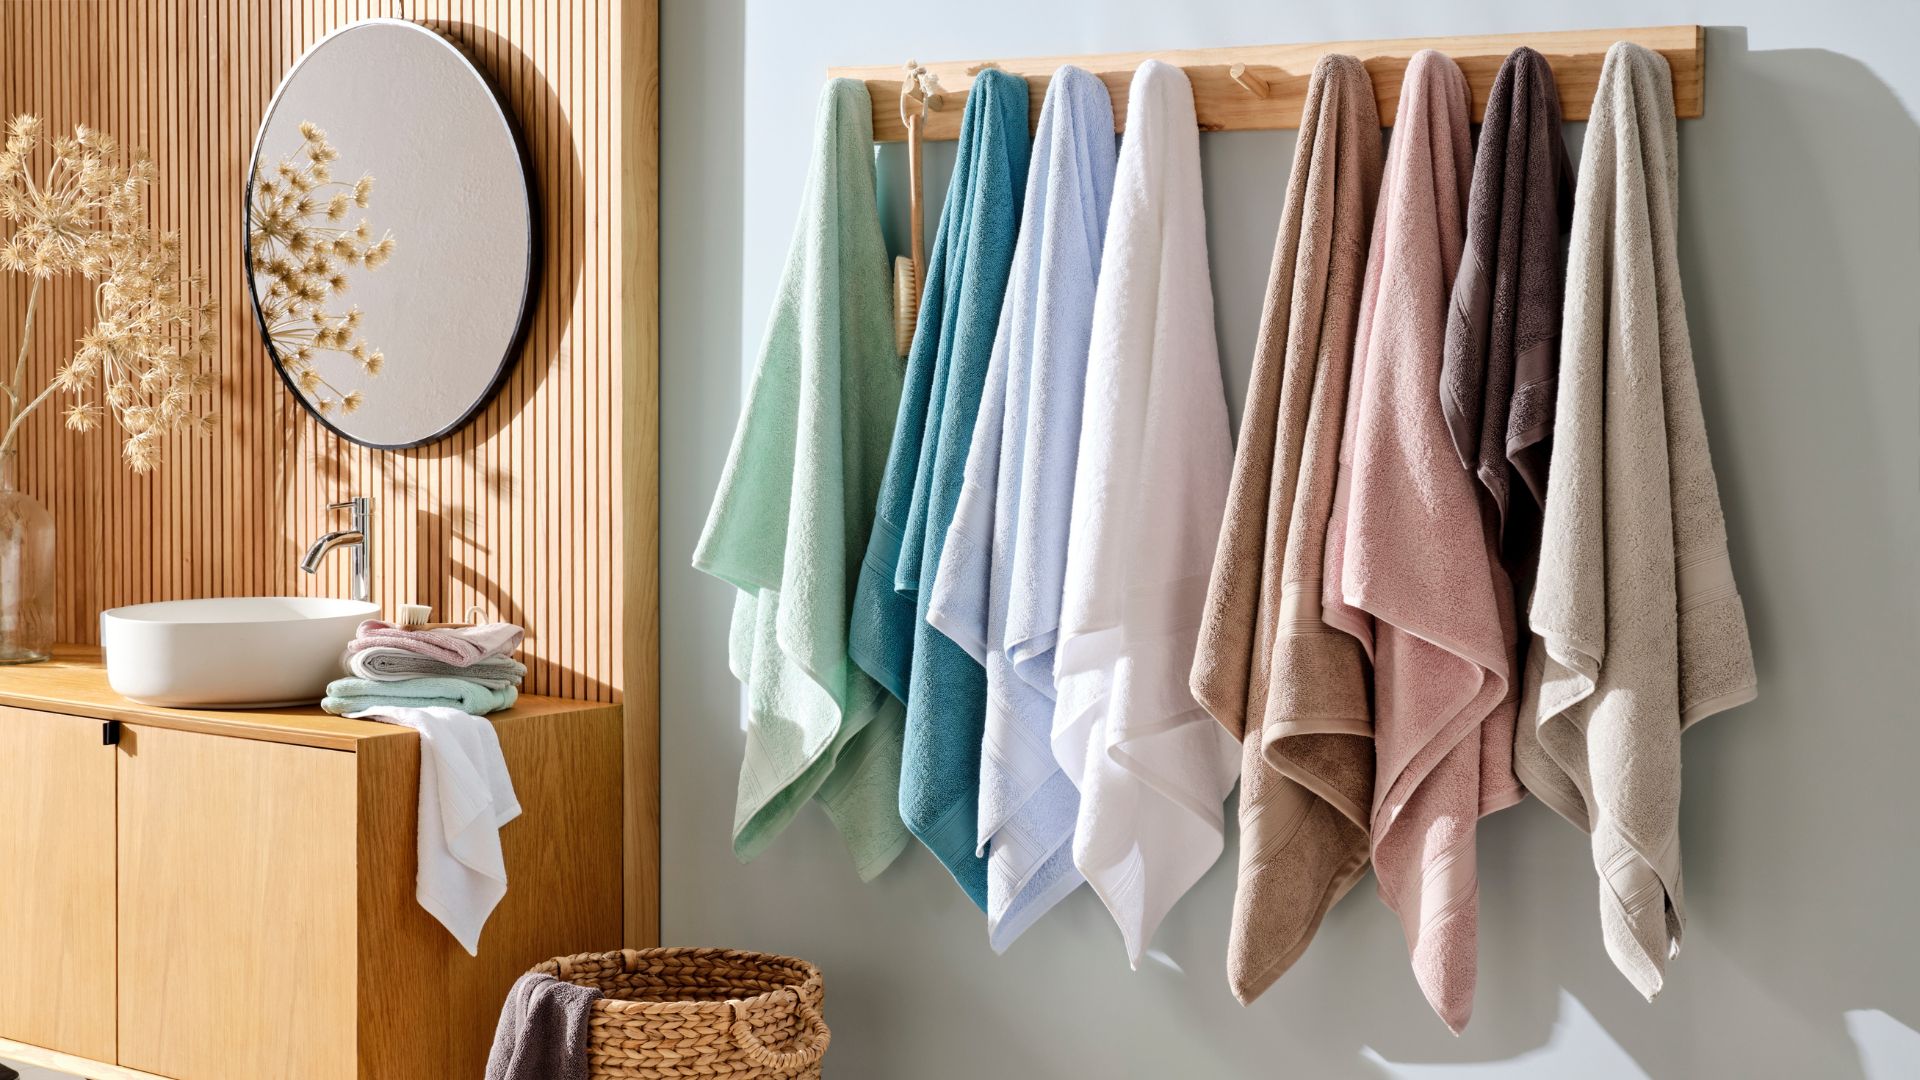 How to Wash and Care For Towels